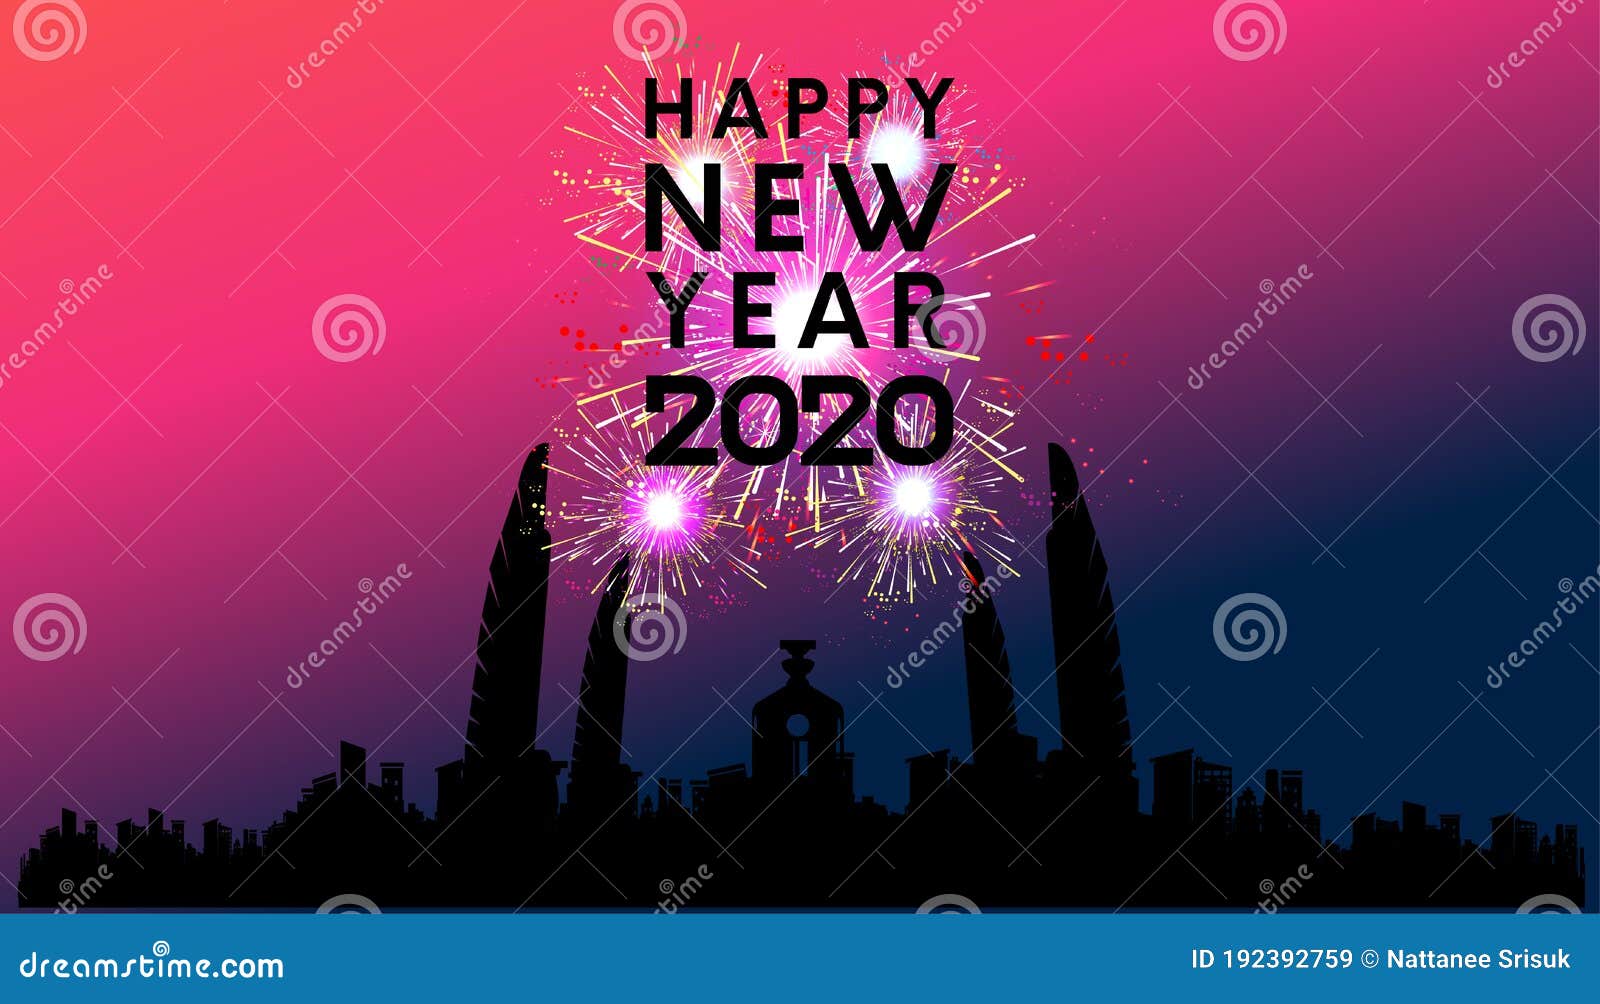 Happy New Year 2020 Text Black - Fireworks Golden - Building in ...